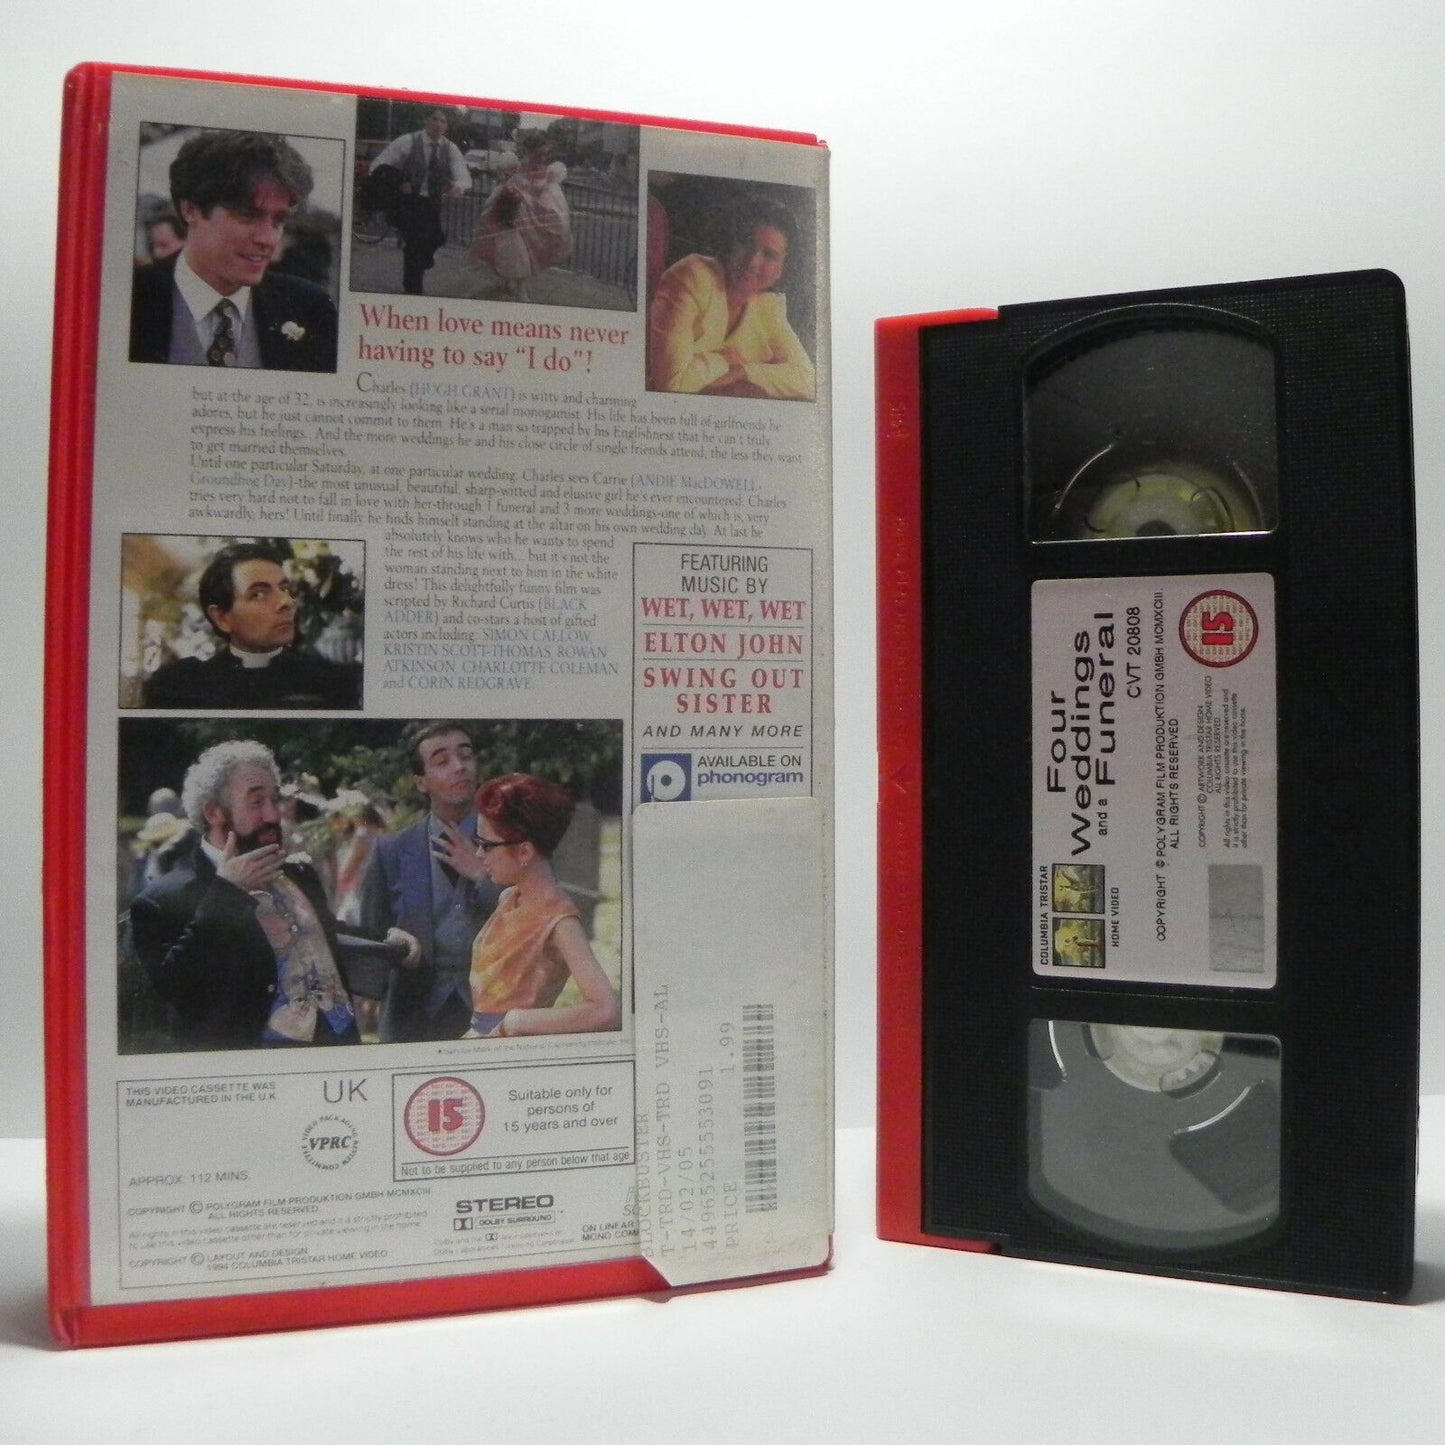 Four Weddings And The Funeral: (1994) Comedy/Drama - Large Box - H.Grant - VHS-